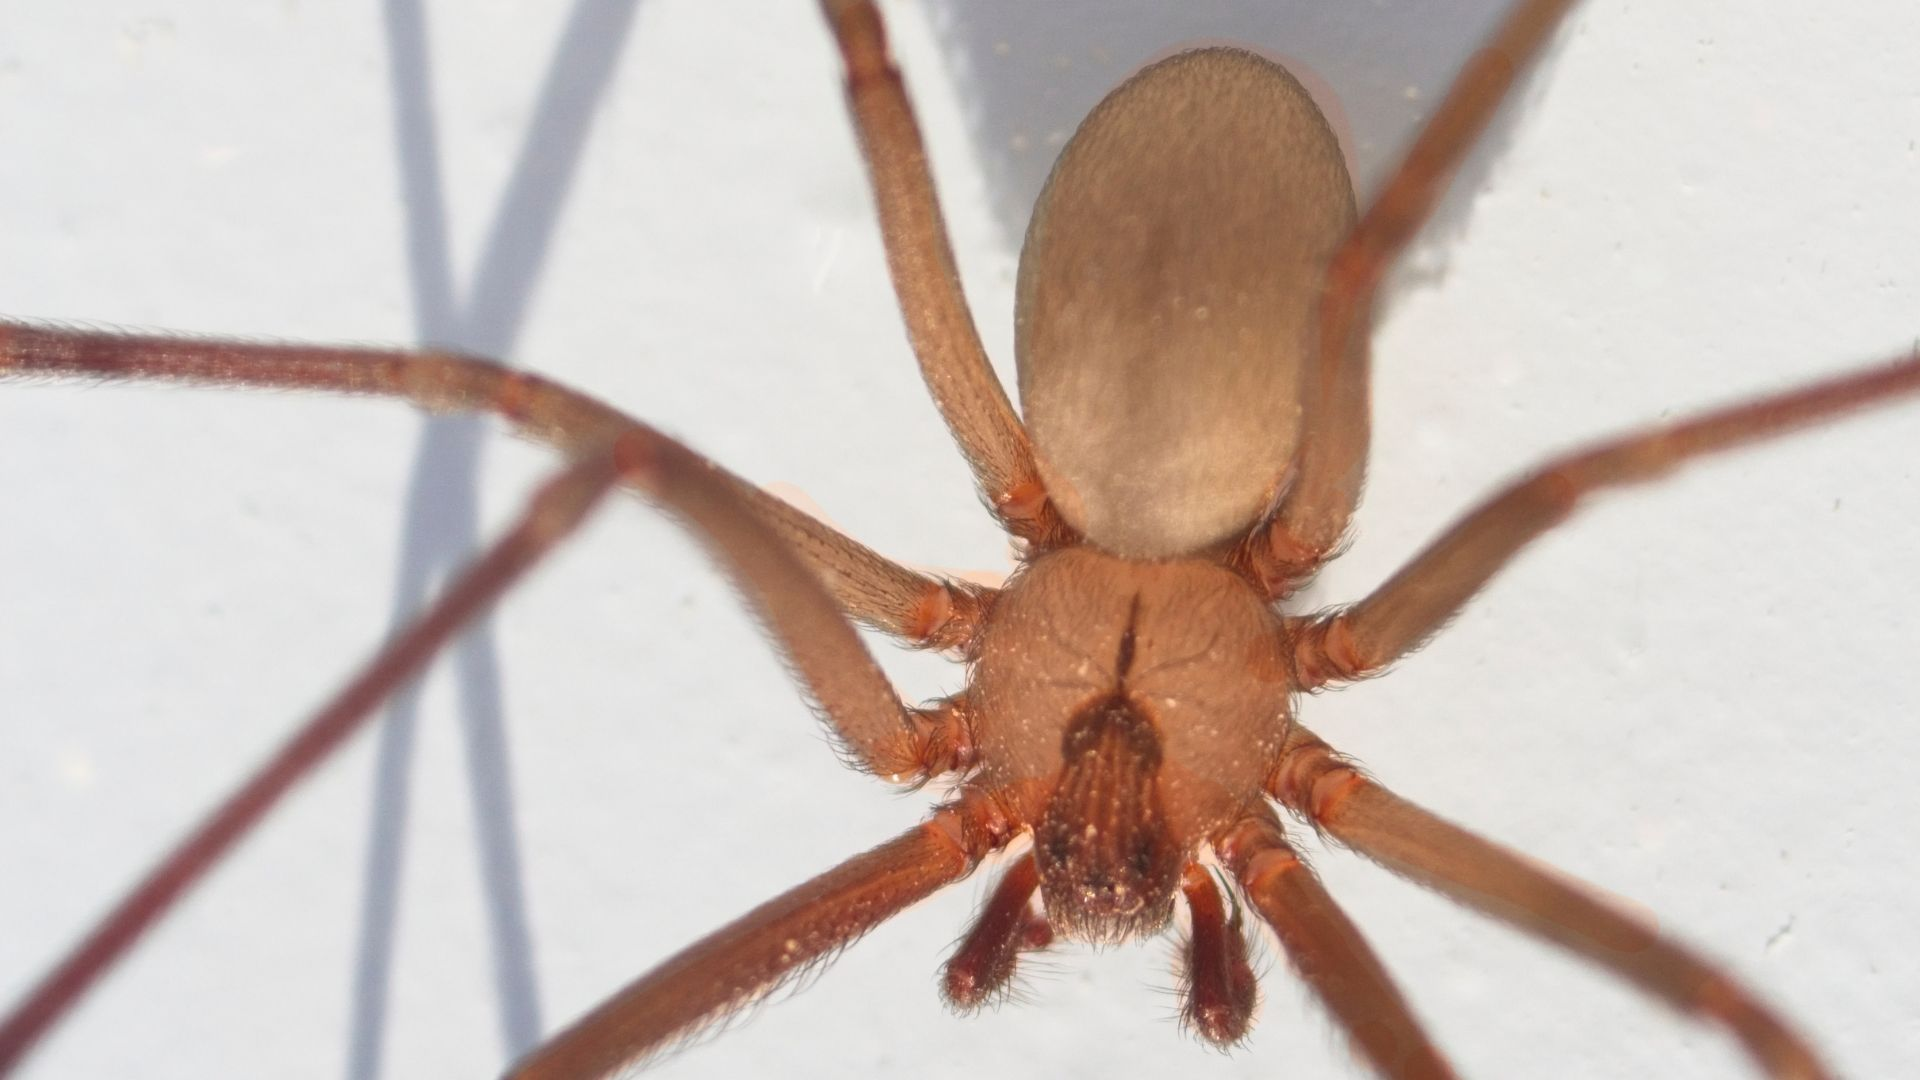 A close-up image of a brown recluse highlighting the violin-shaped marking on its head.